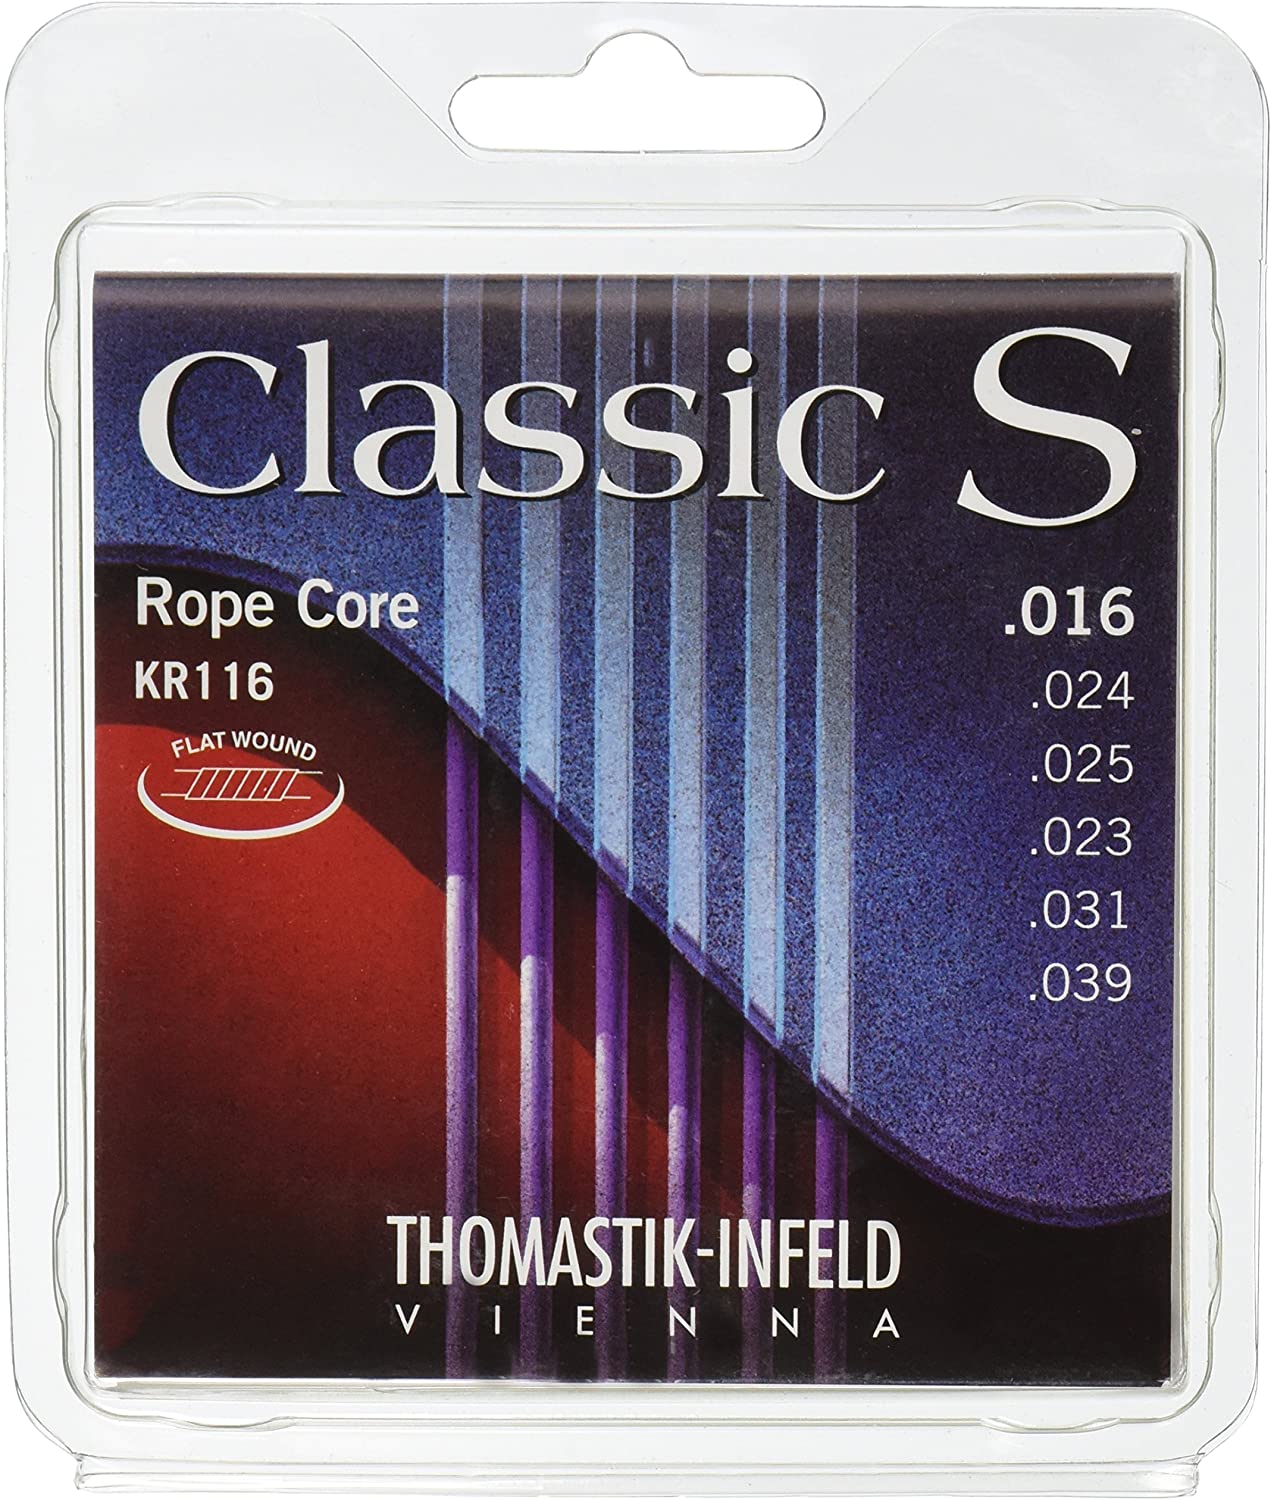 Thomastik-Infeld KR116 Classical Guitar Strings on a white background